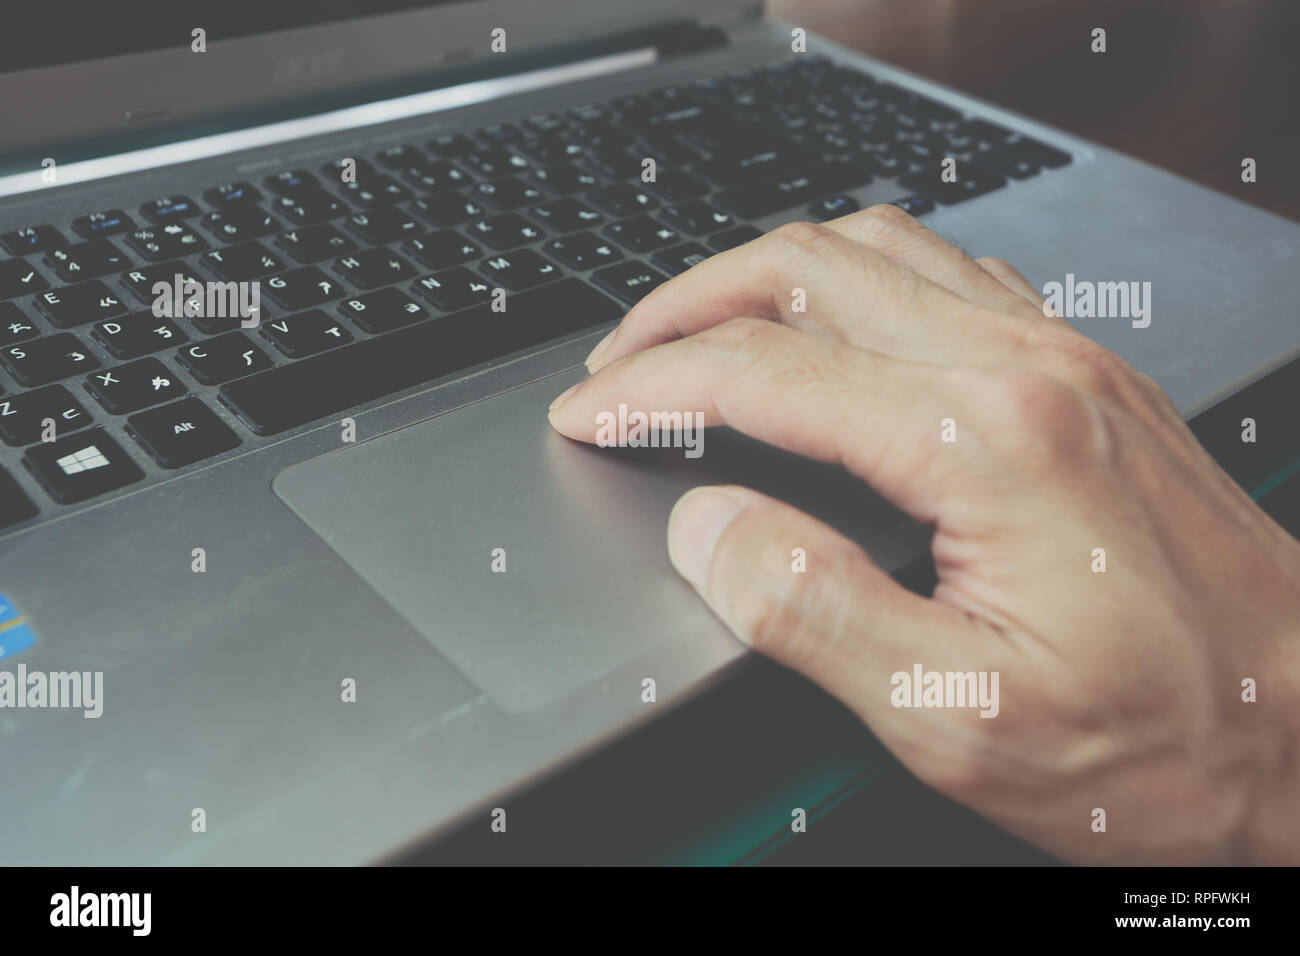 Man's hand using silver laptop touchpad, trackpad use, drag and drop, gestures, keypad Stock Photo